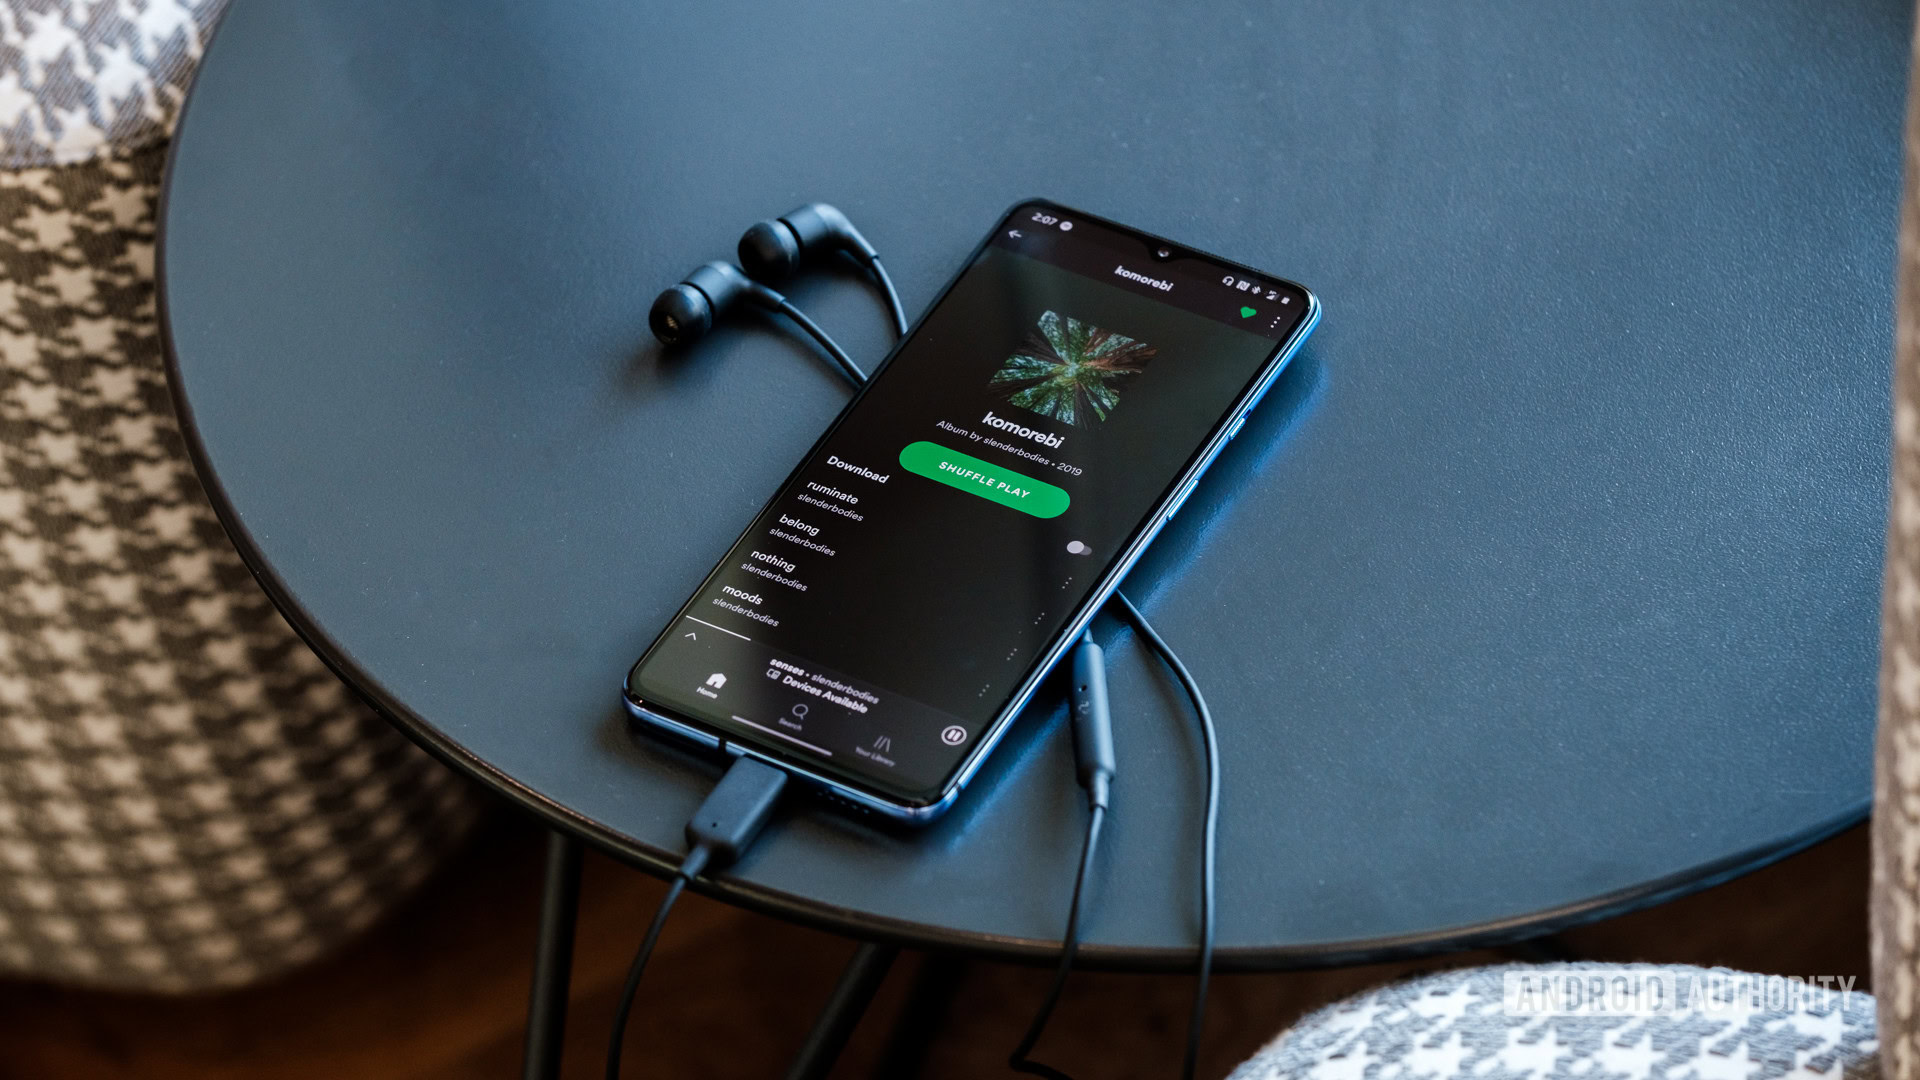 The best radio apps for Android to listen to music - Android Authority